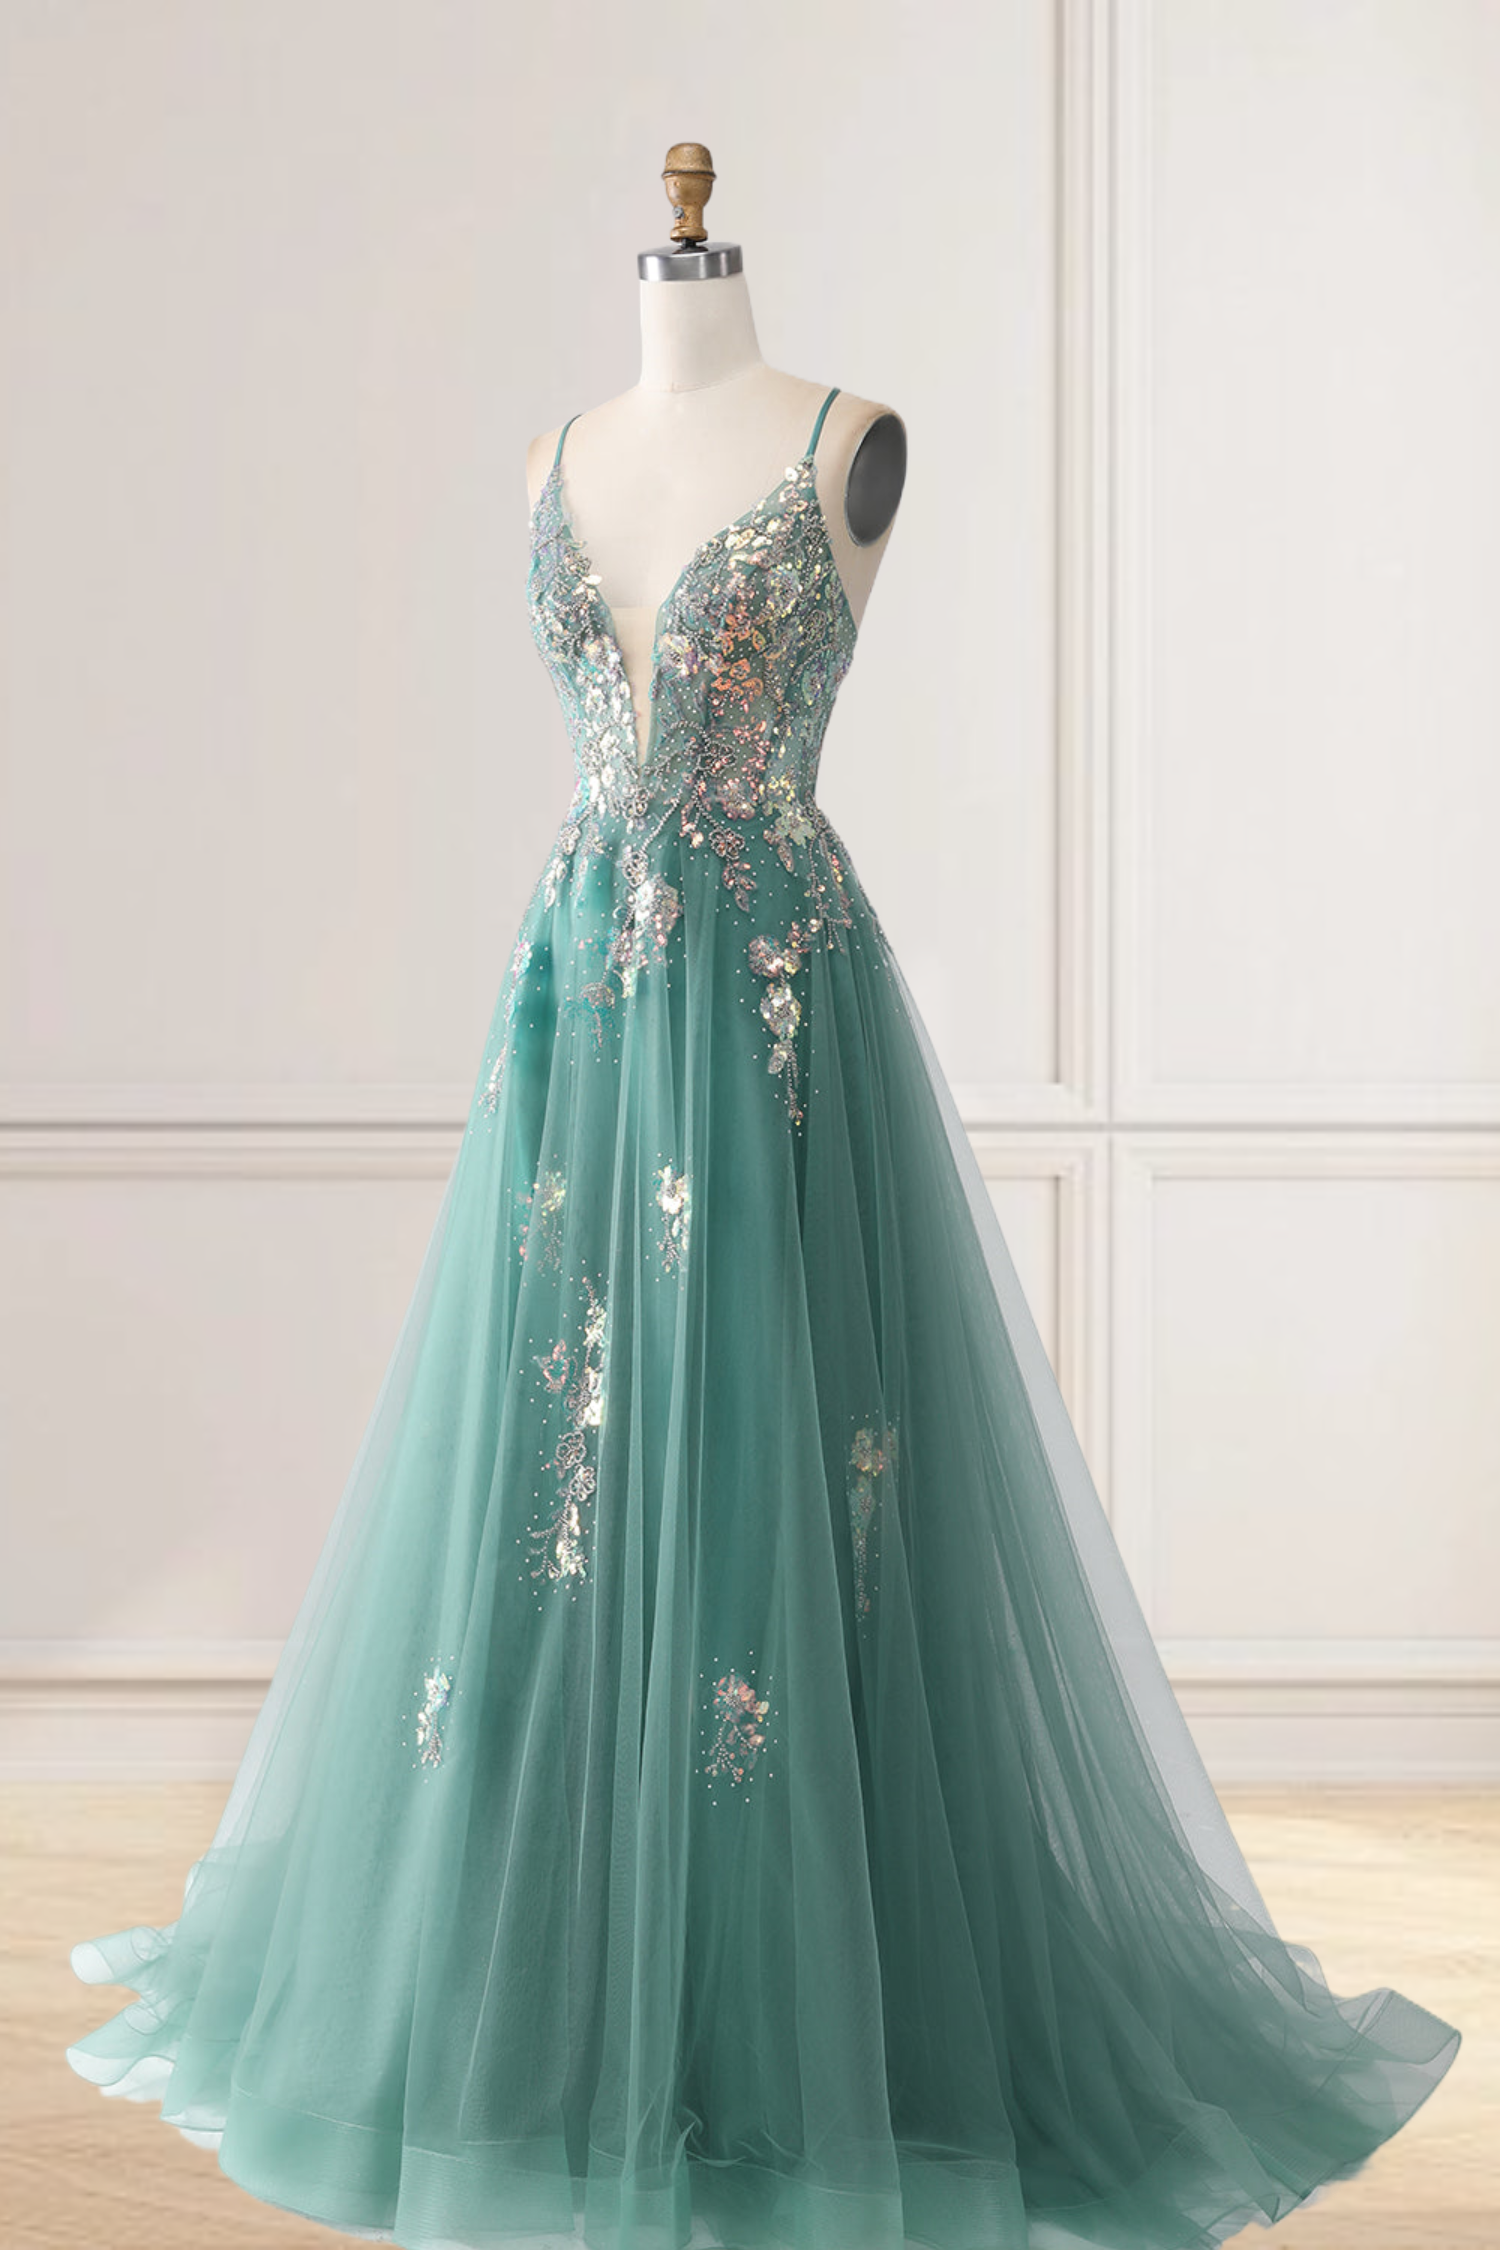 Dressime A Line Spaghetti Straps Tulle Long Prom Dresses with Sequin Appliques